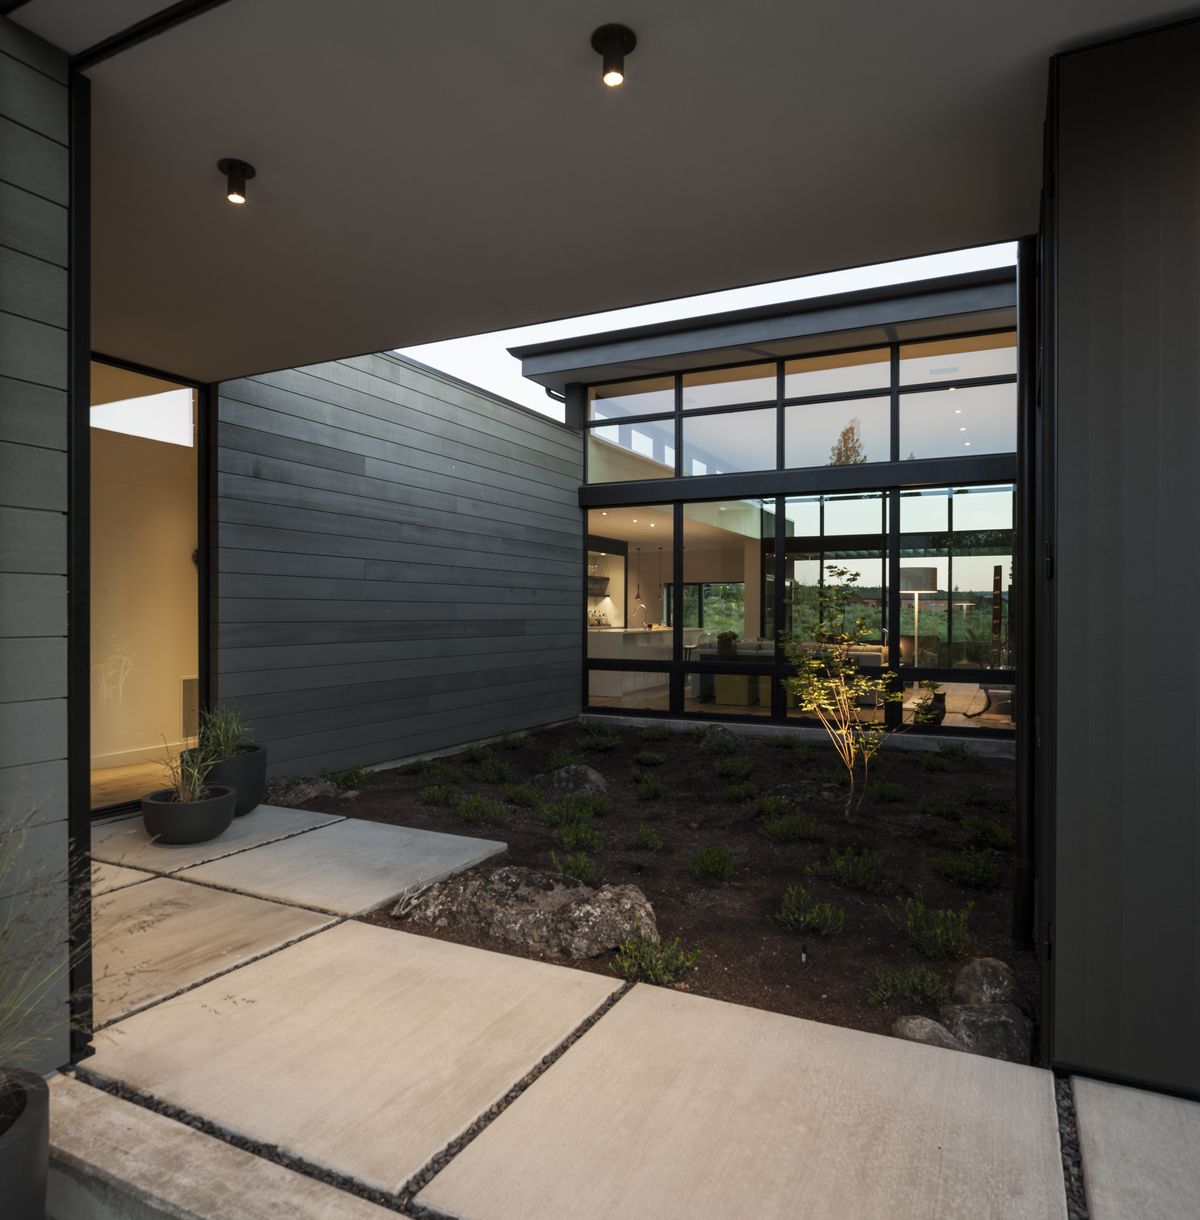 Courtyard of modern house with concrete path